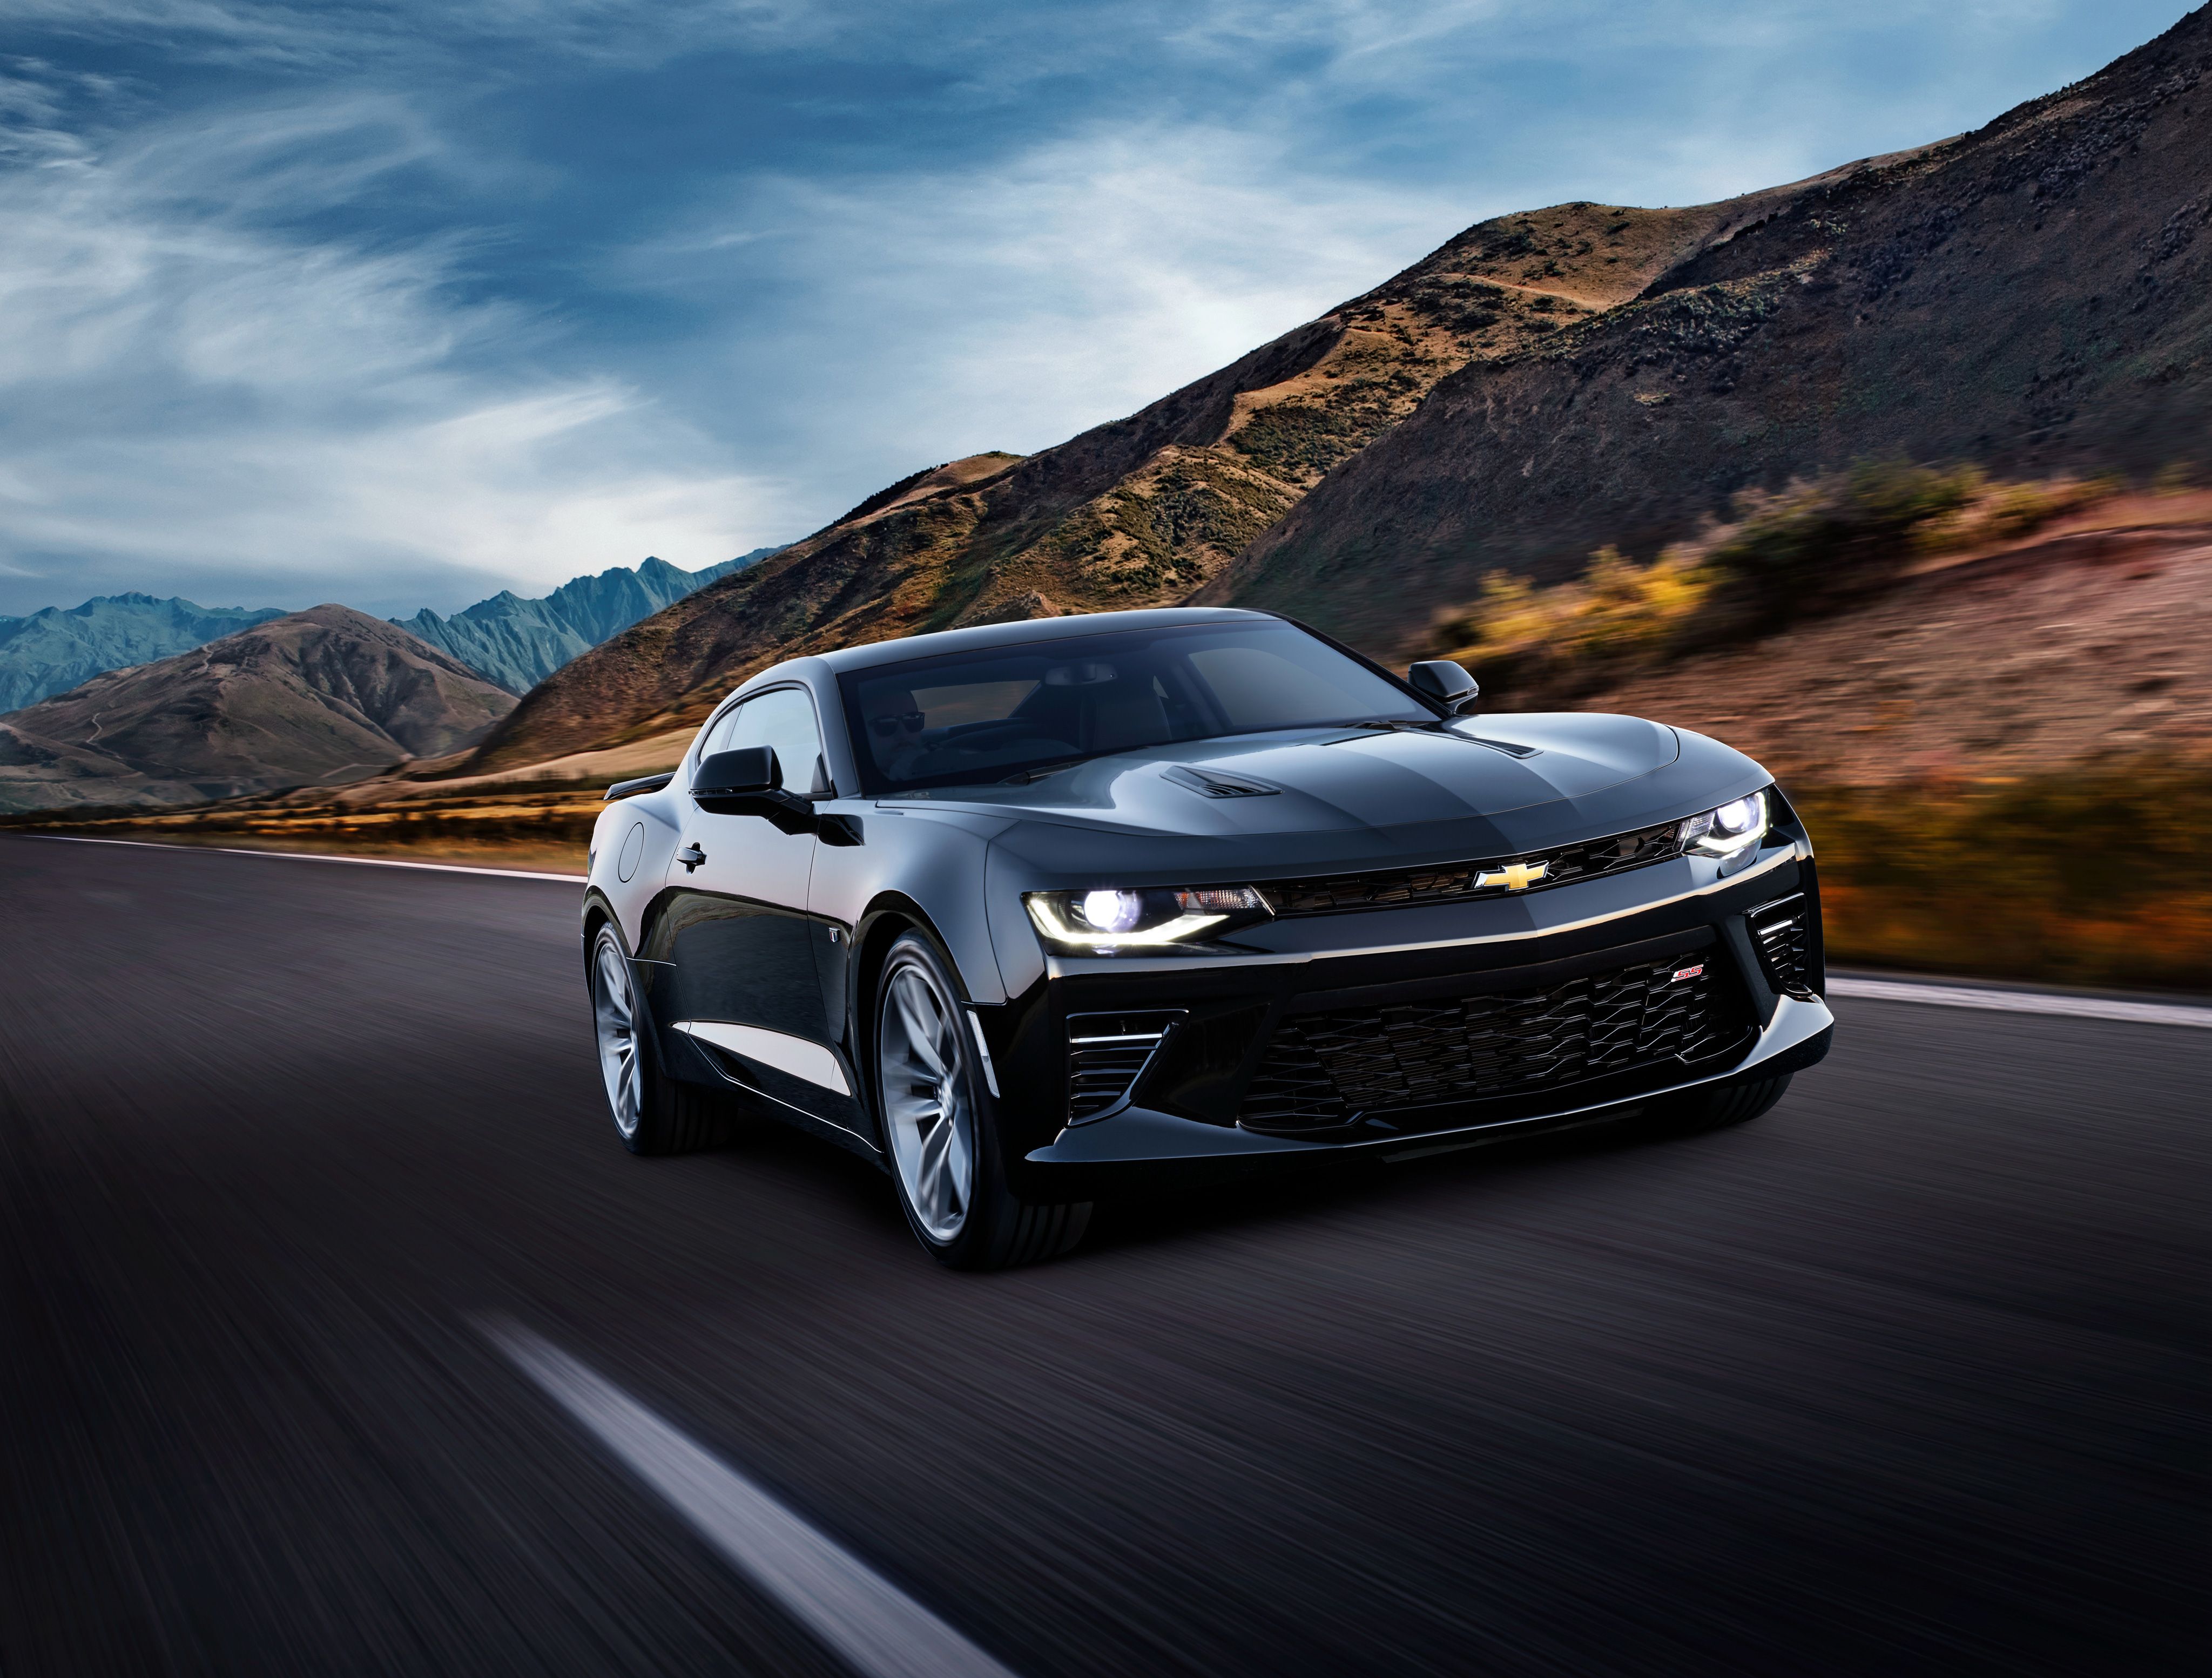 Chevrolet Camaro SS 2018 4k, HD Cars, 4k Wallpaper, Image, Background, Photo and Picture